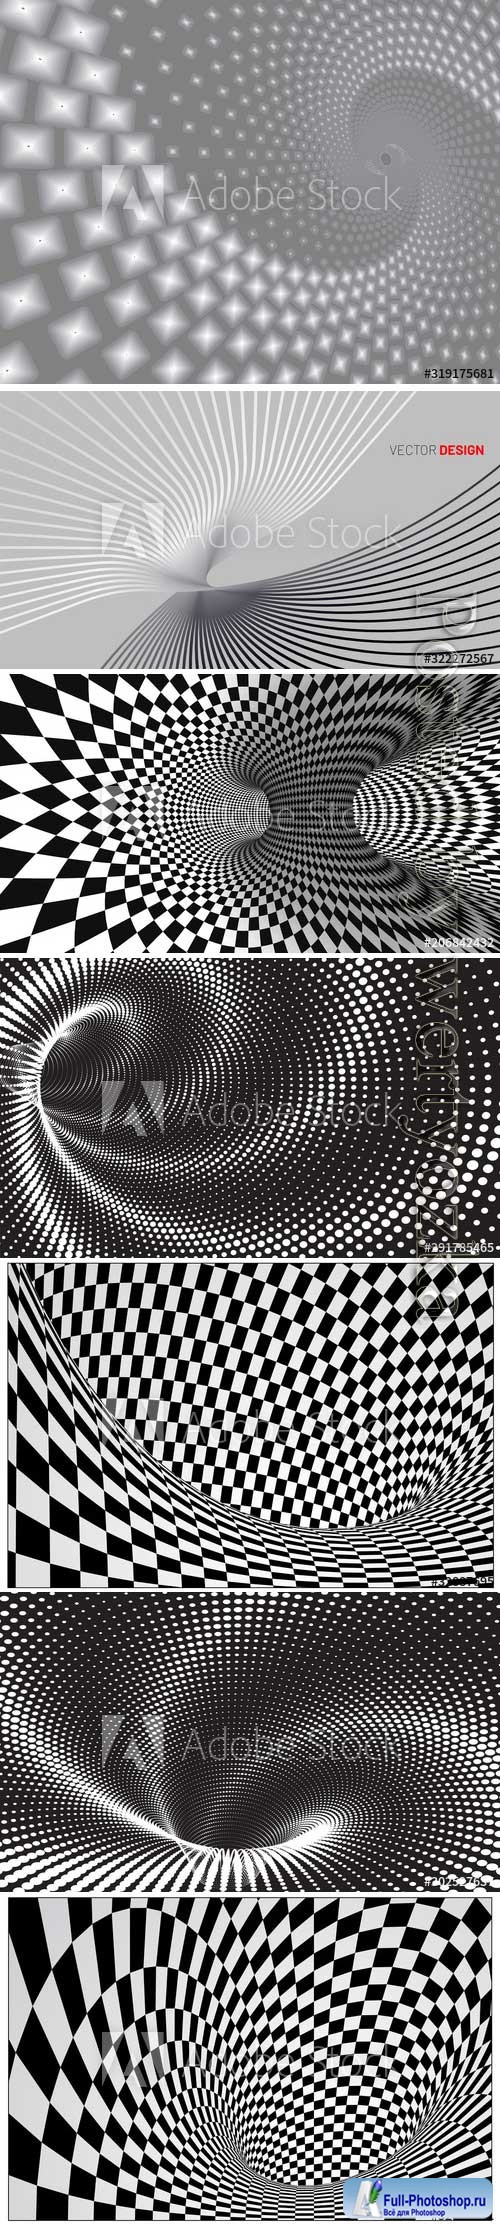 Dotted halftone vector spiral pattern, squares space view